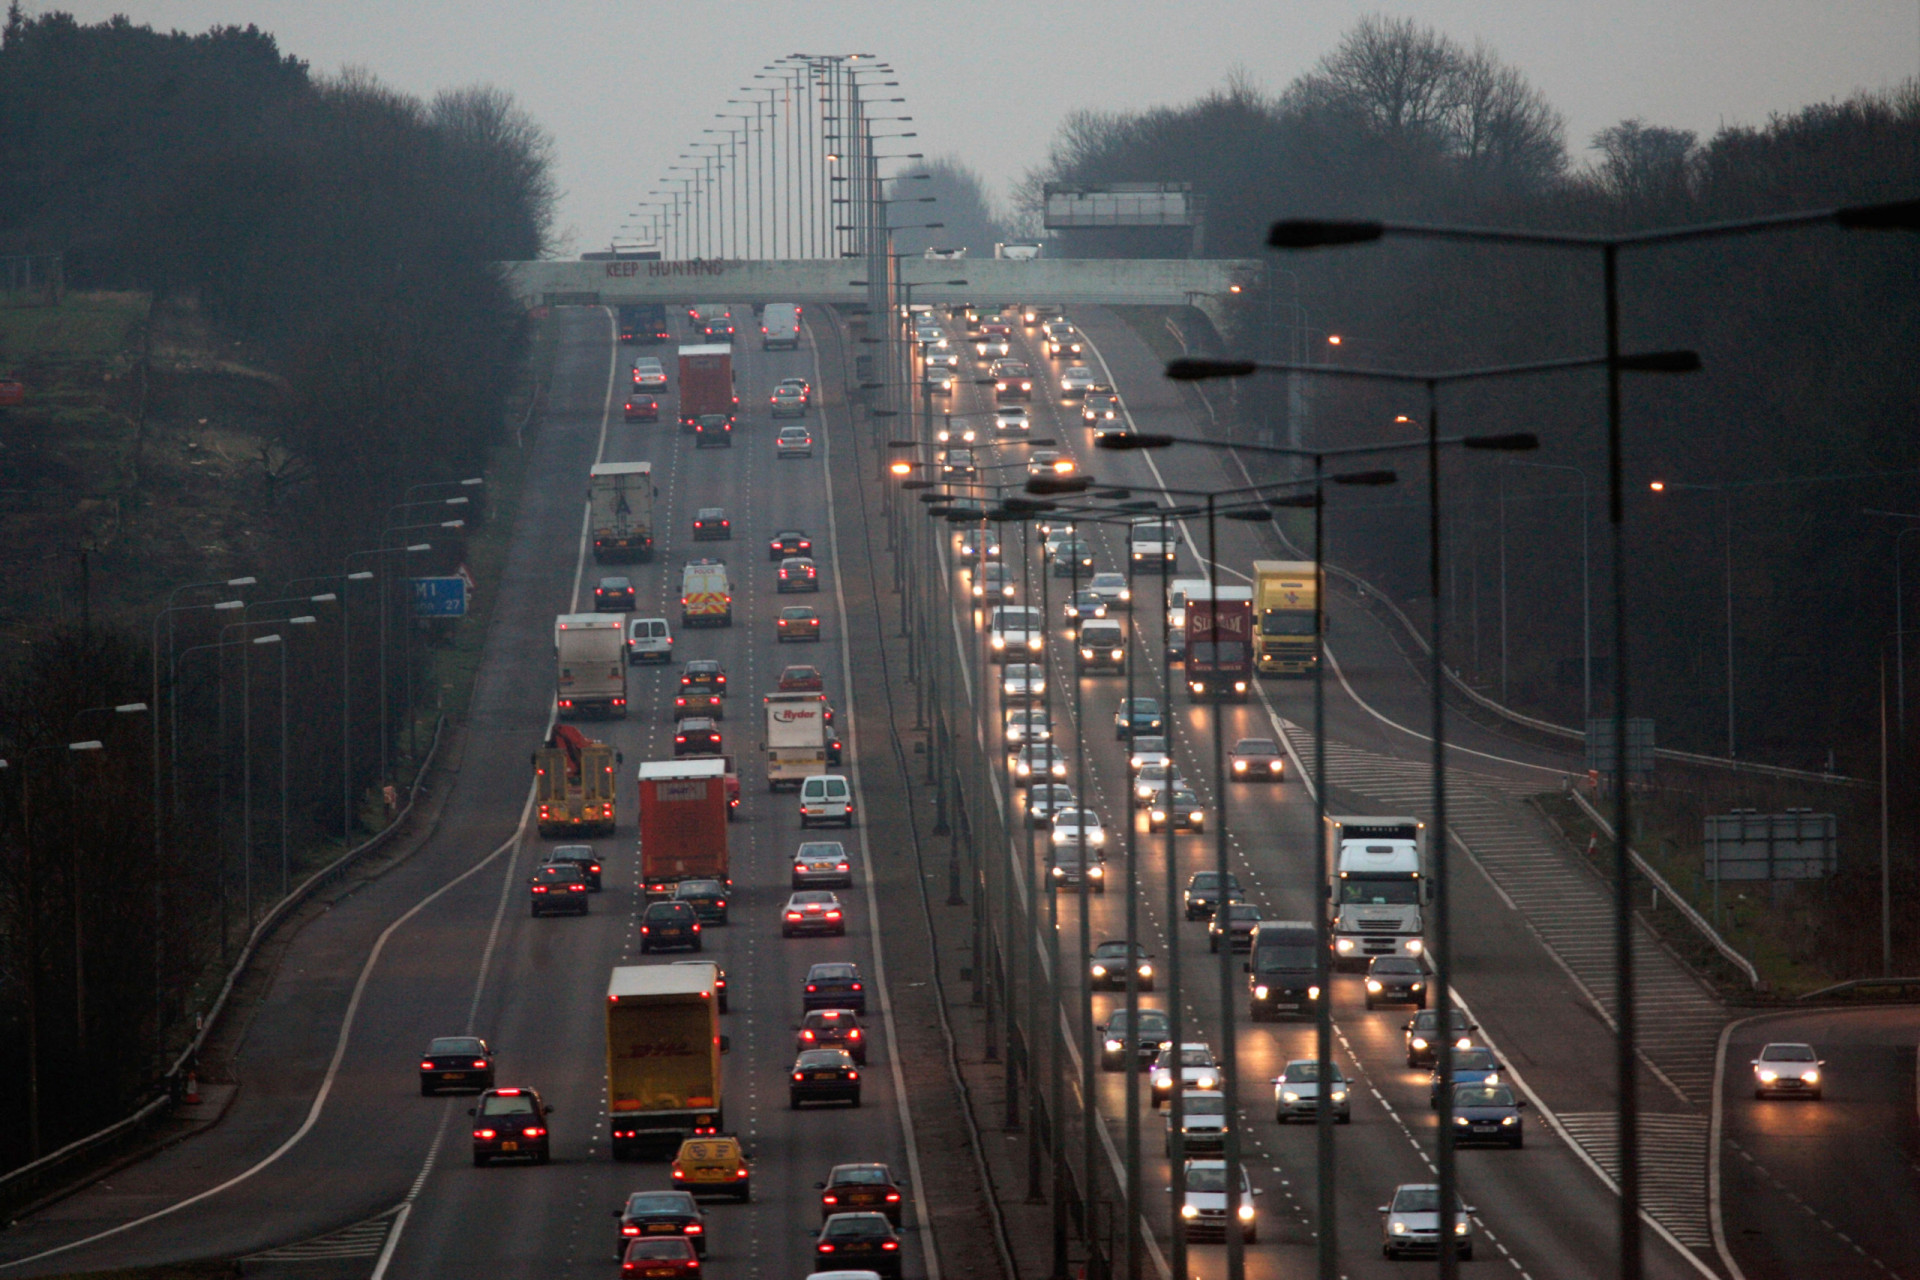 <p>An iconic example of civil engineering, the M1 carries anywhere between 130,000 and 140,000 vehicles every day. But it's not Britain's busiest motorway. That honor belongs to the M25.</p><p><a href="https://www.msn.com/en-us/community/channel/vid-7xx8mnucu55yw63we9va2gwr7uihbxwc68fxqp25x6tg4ftibpra?cvid=94631541bc0f4f89bfd59158d696ad7e">Follow us and access great exclusive content every day</a></p>